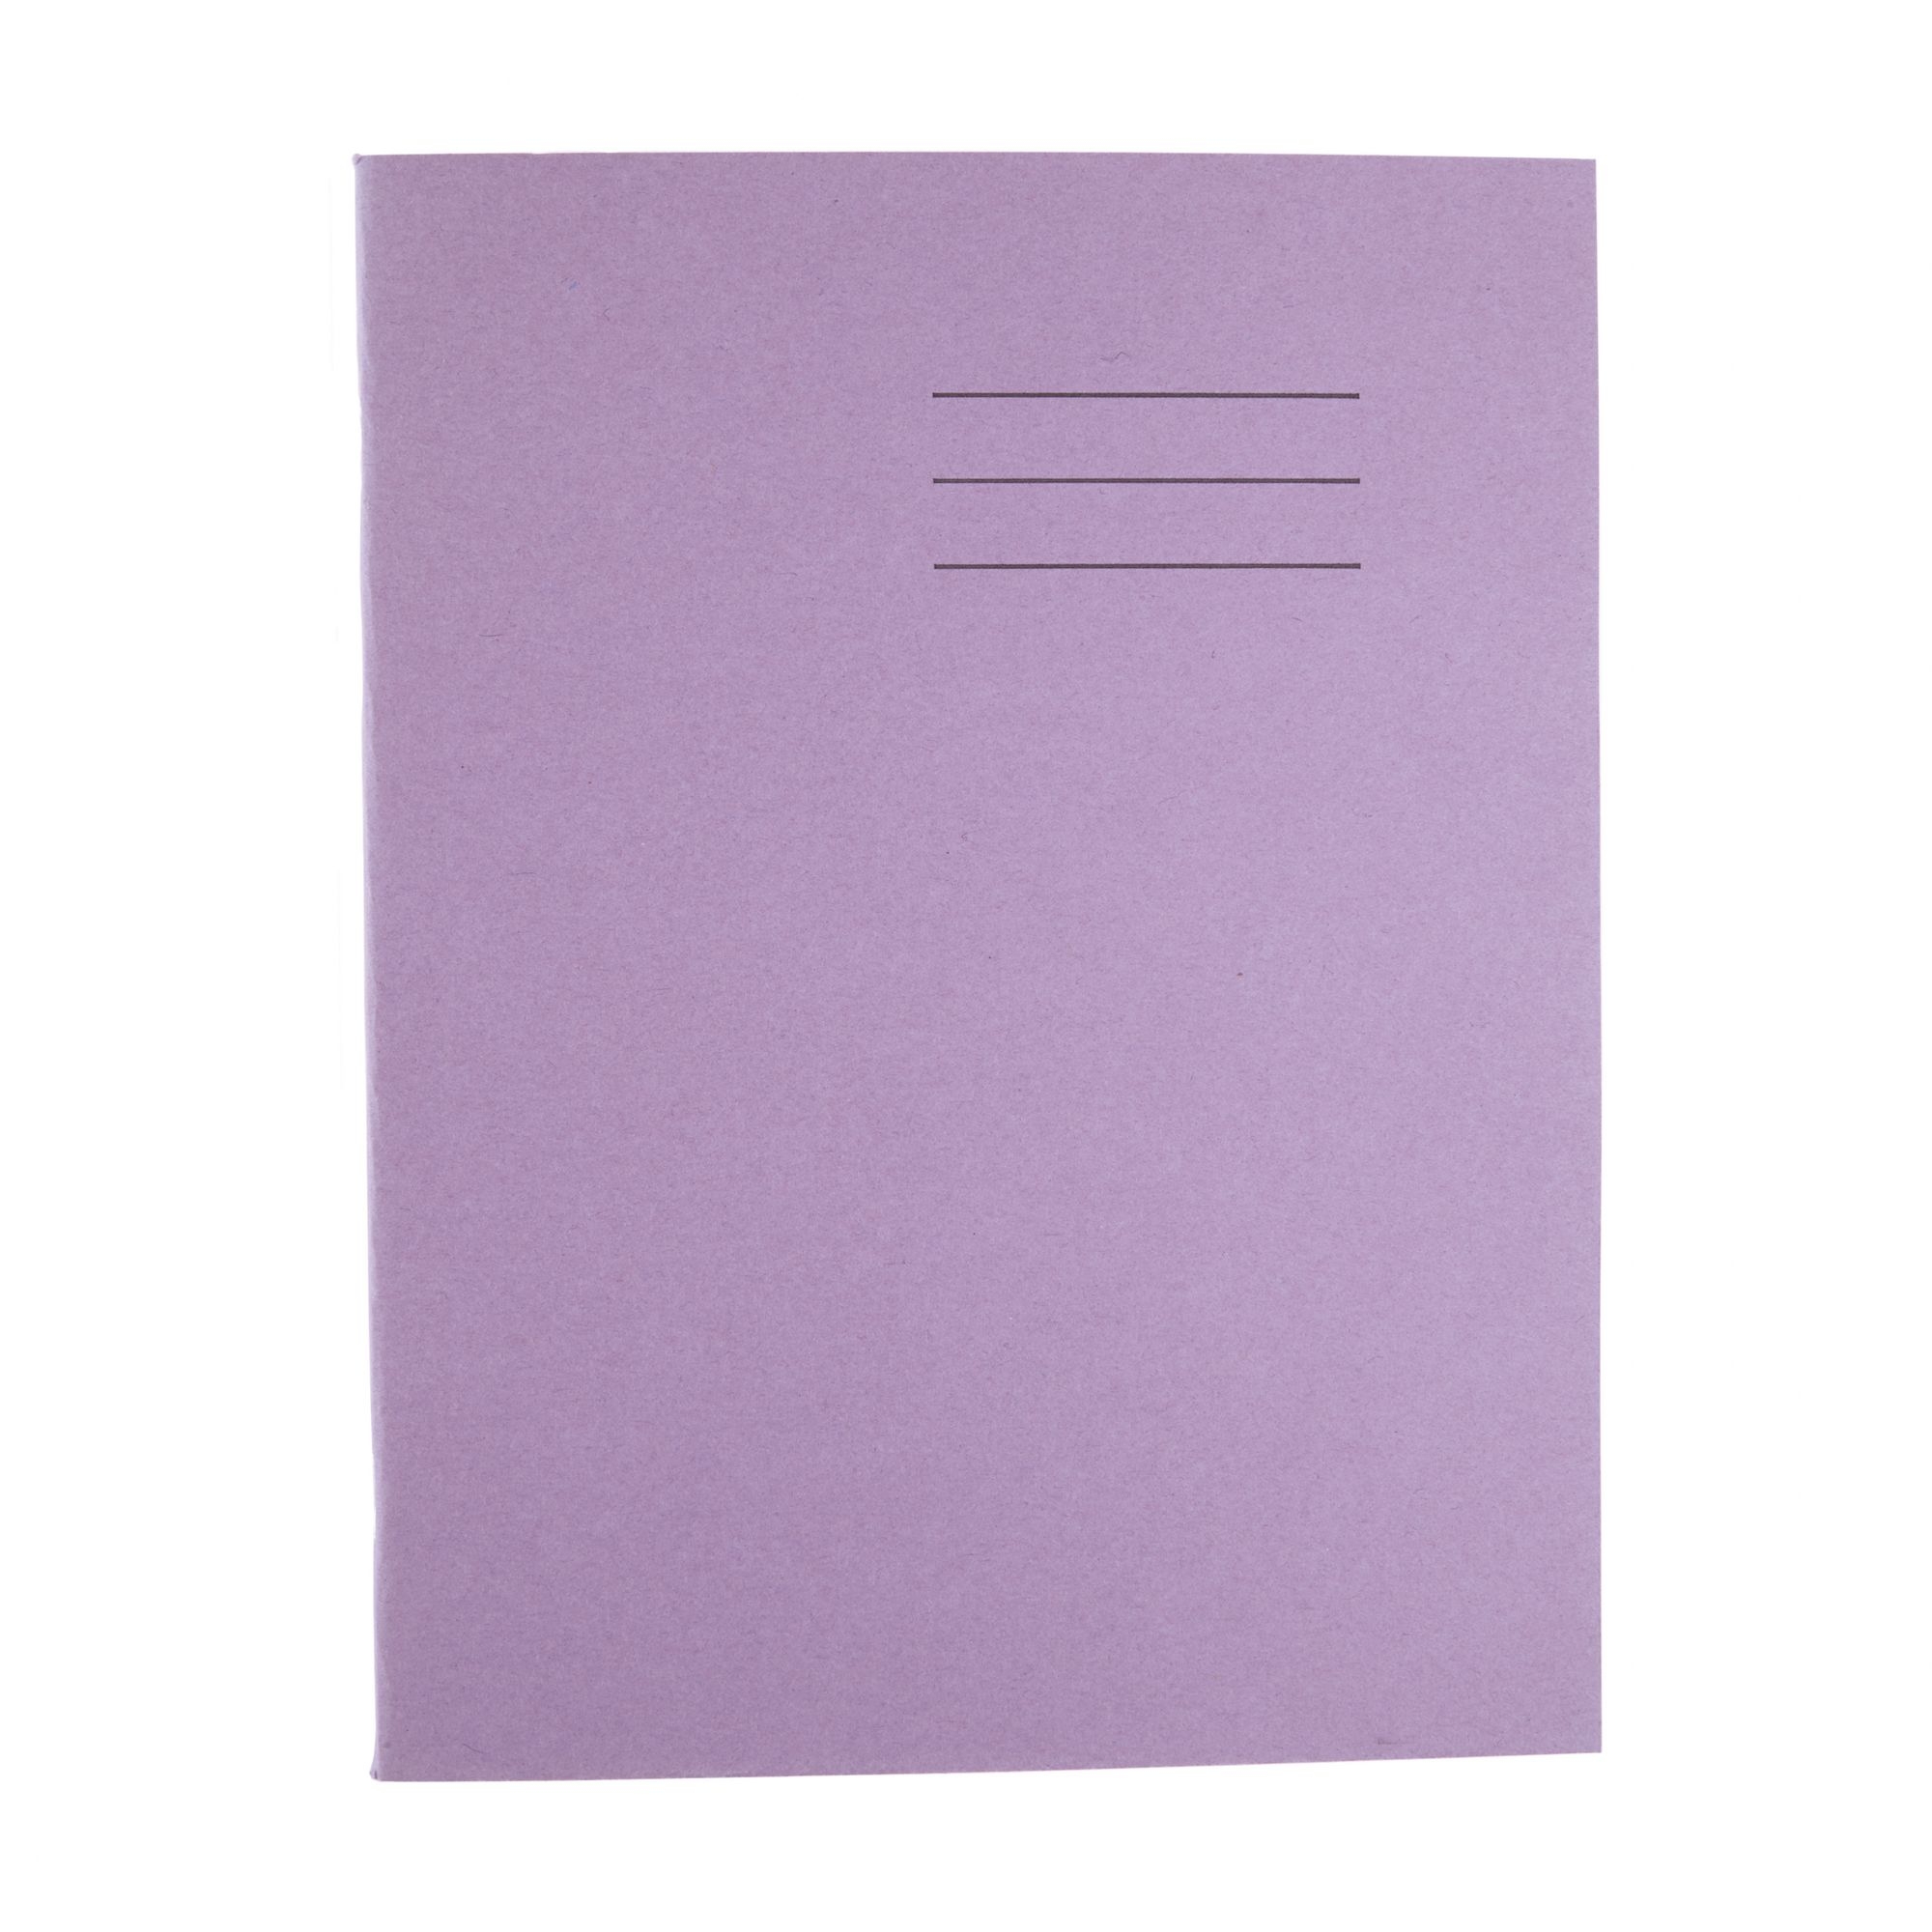 Classmates Purple 9x7" 32 page 15mm Ruling/Plain Alternative Exercise Book - Pack of 100